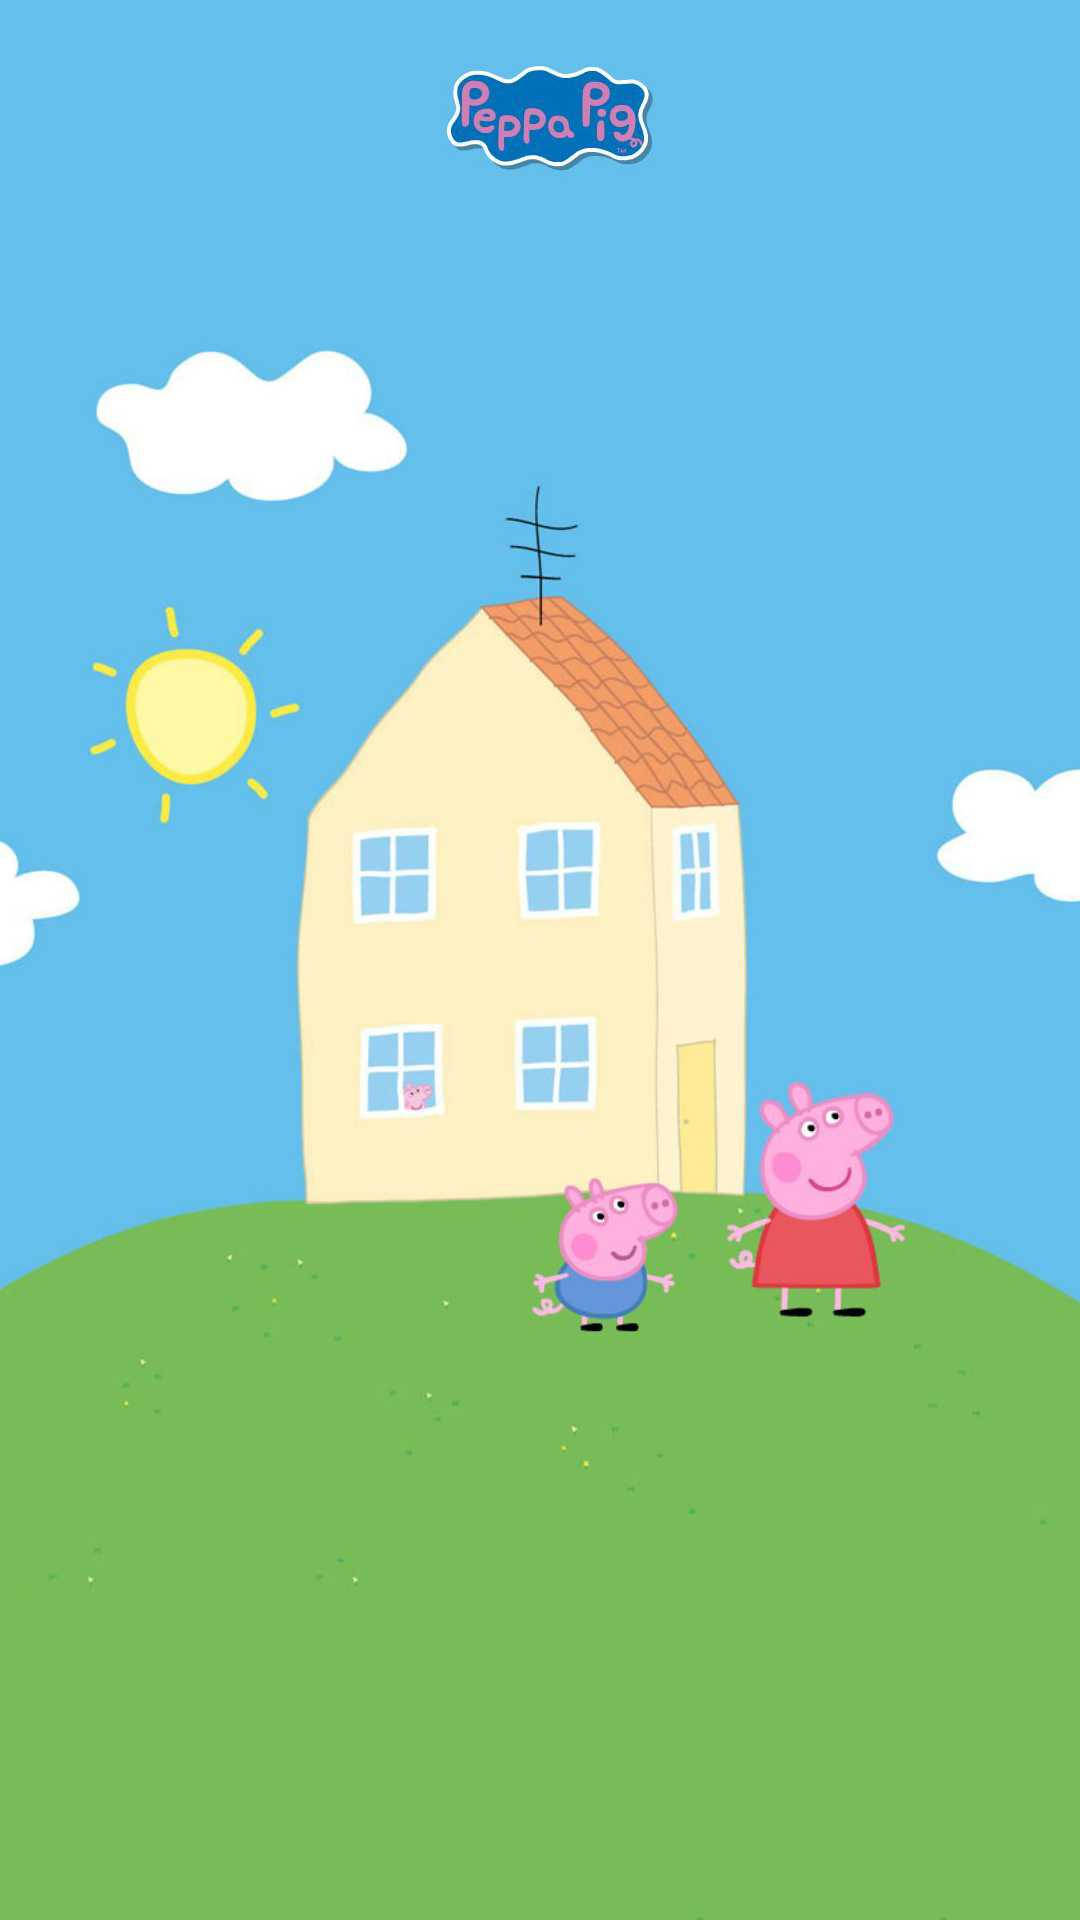 George And Peppa Pig Iphone Wallpaper